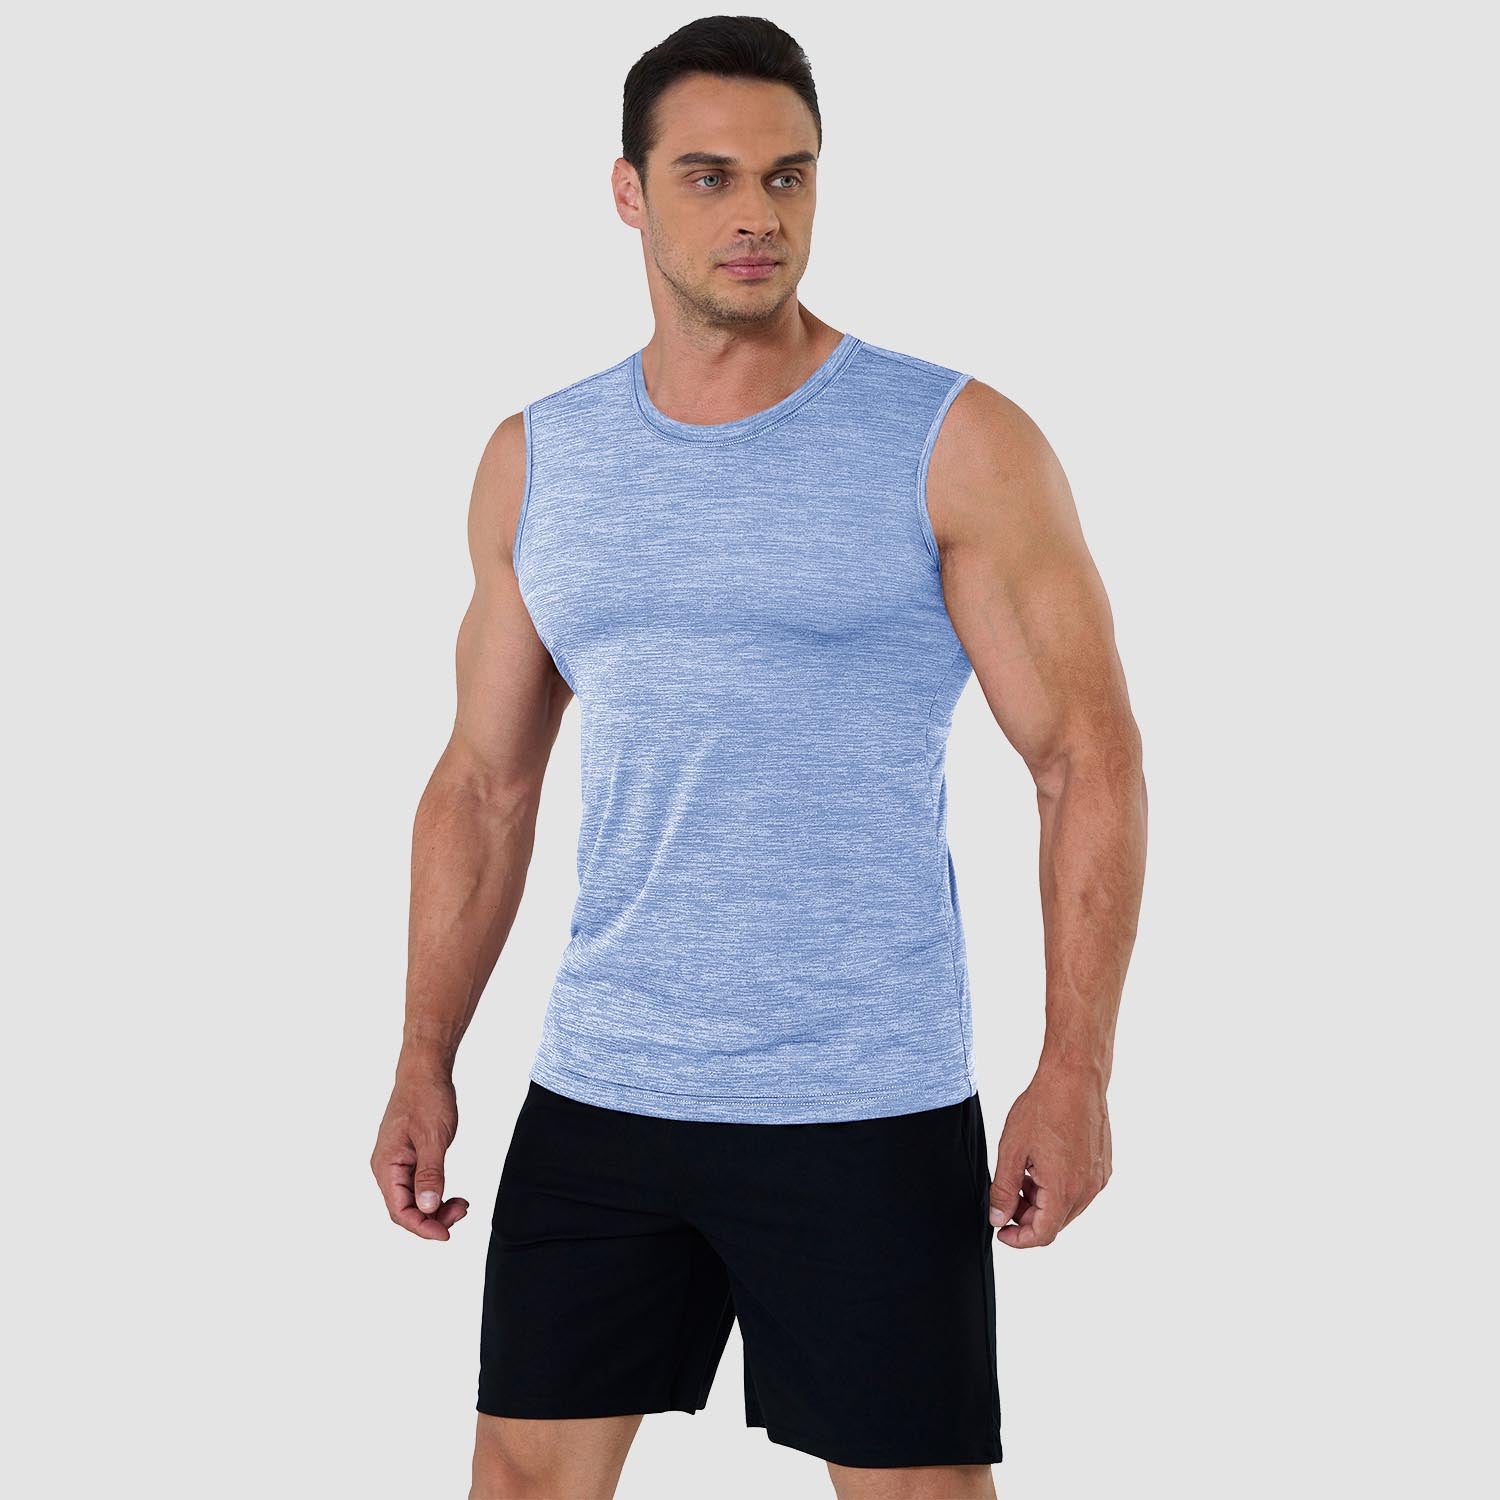 Men's Tank Tops Quick Dry Sleeveless Shirts Muscle Shirts Workout Gym